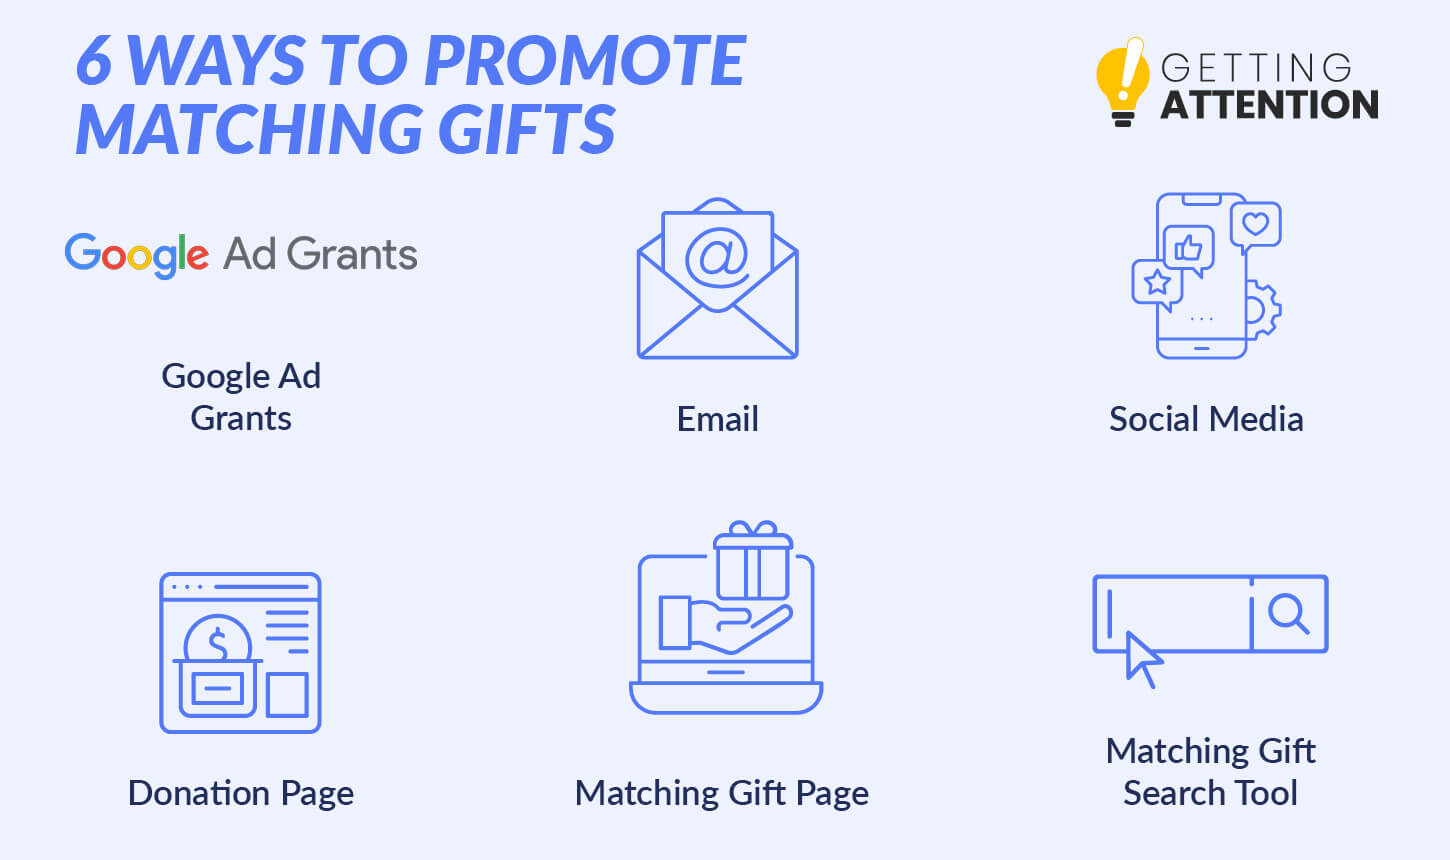 Check out the top six ways to promote matching gifts.